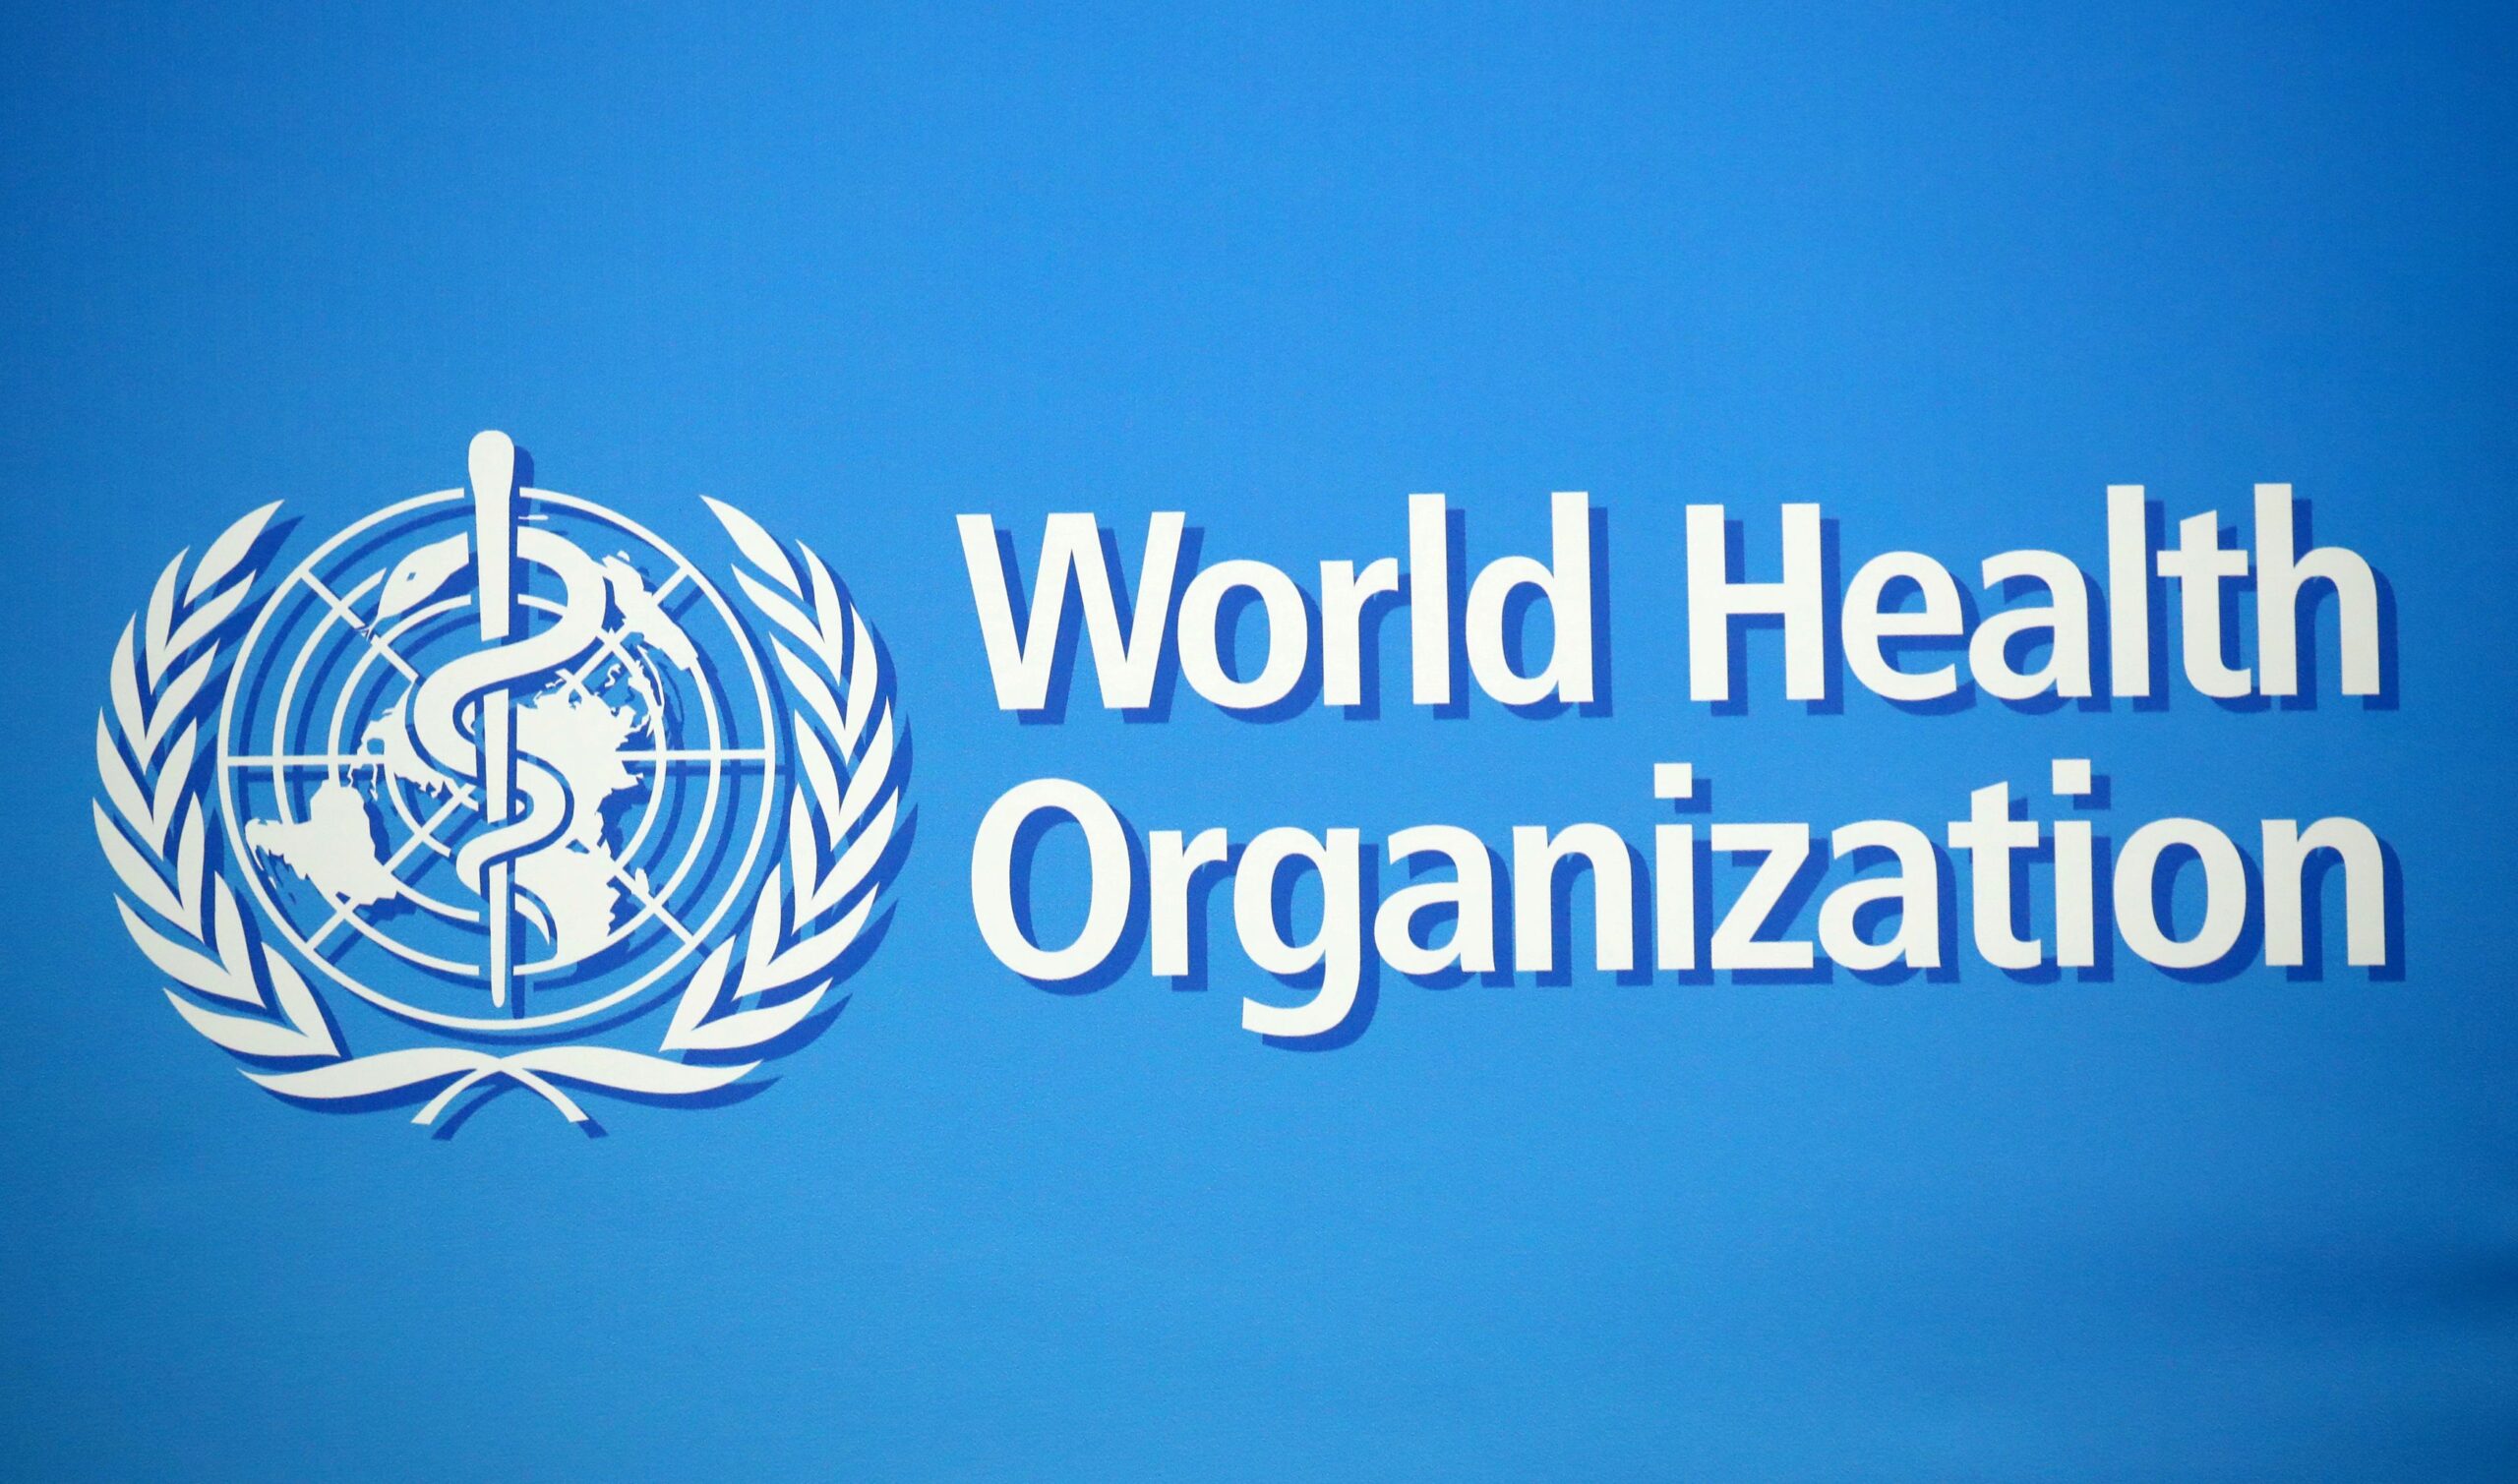 World Health Organization launches Mobile Health Insurance in Imo State